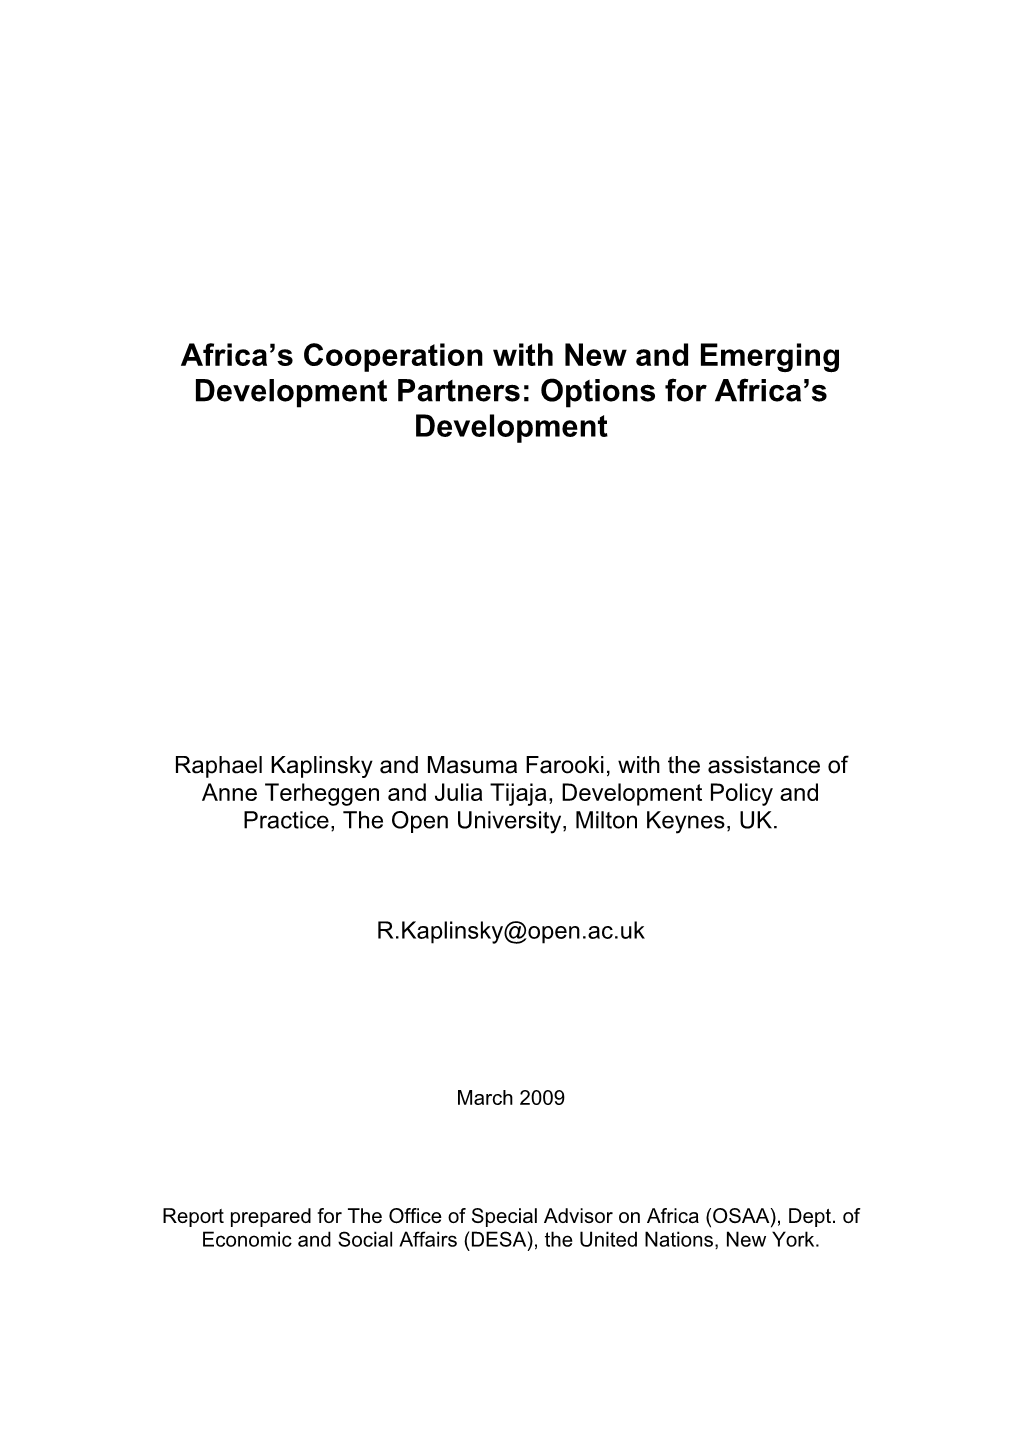 Africa's Cooperation with New and Emerging